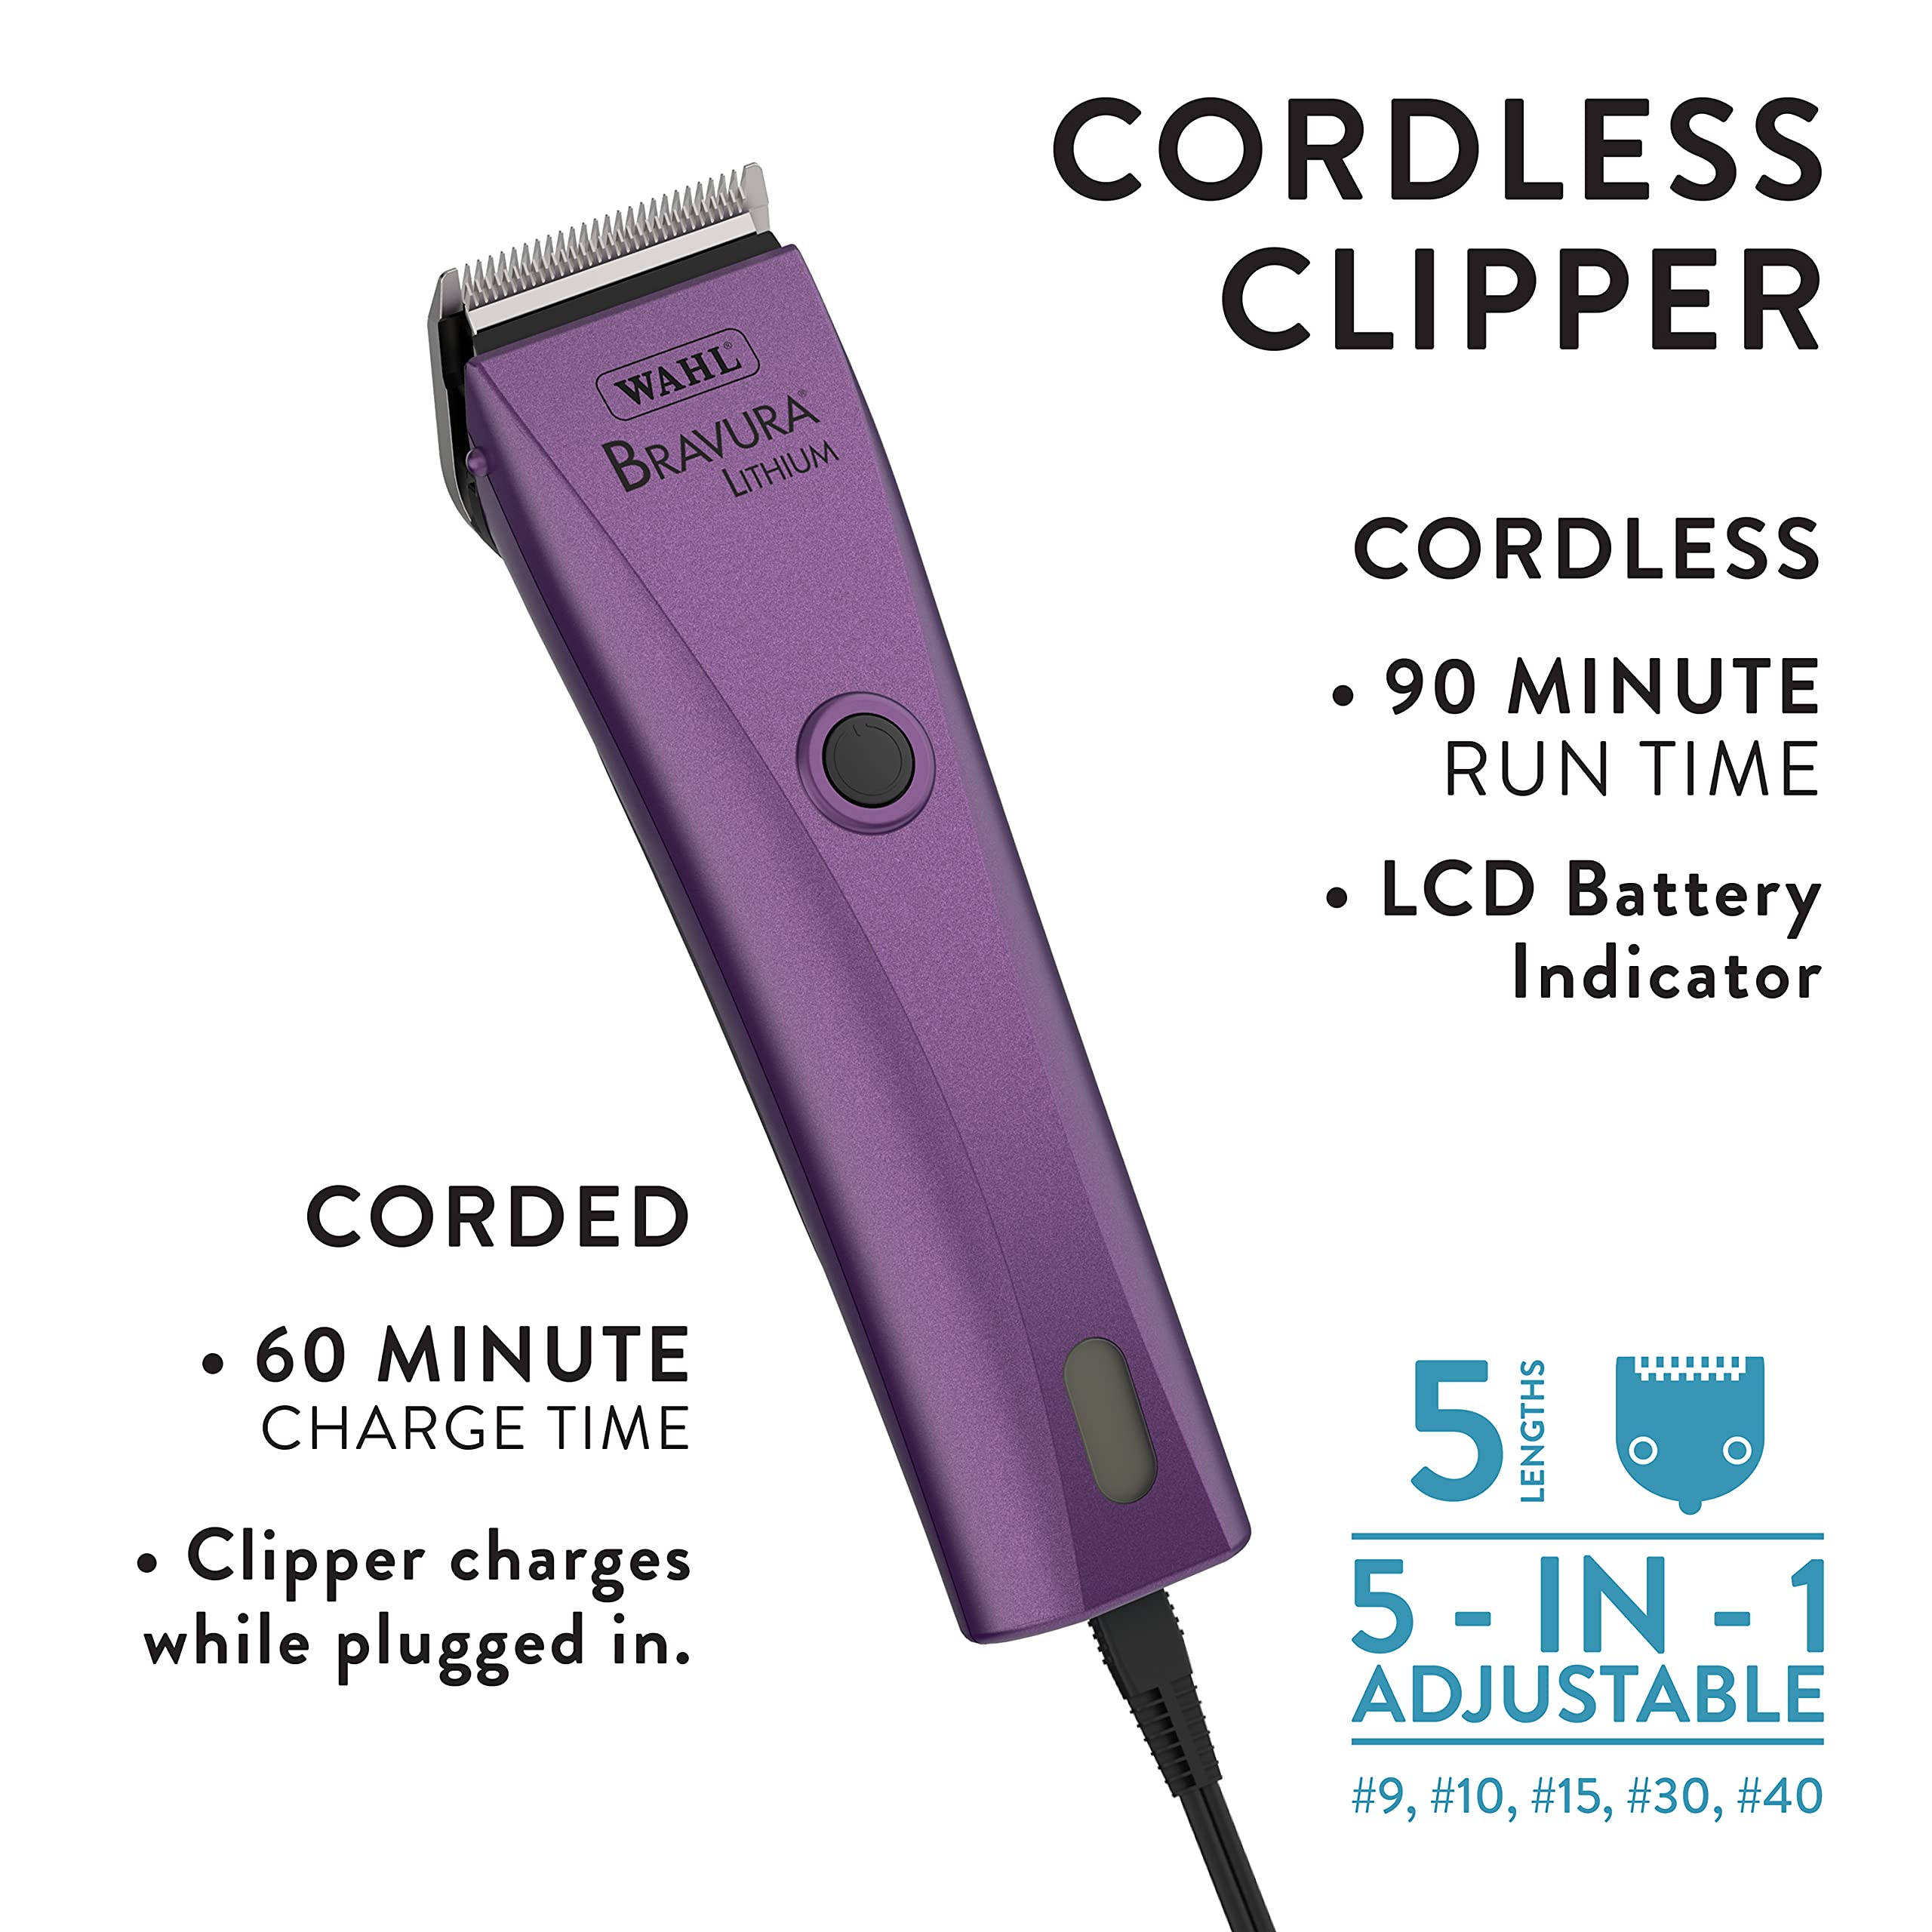 WAHL Professional Animal Bravura Lithium Ion Clipper - Pet, Dog, Cat, and Horse Corded/Cordless Clipper Kit, Purple (41870-0423)